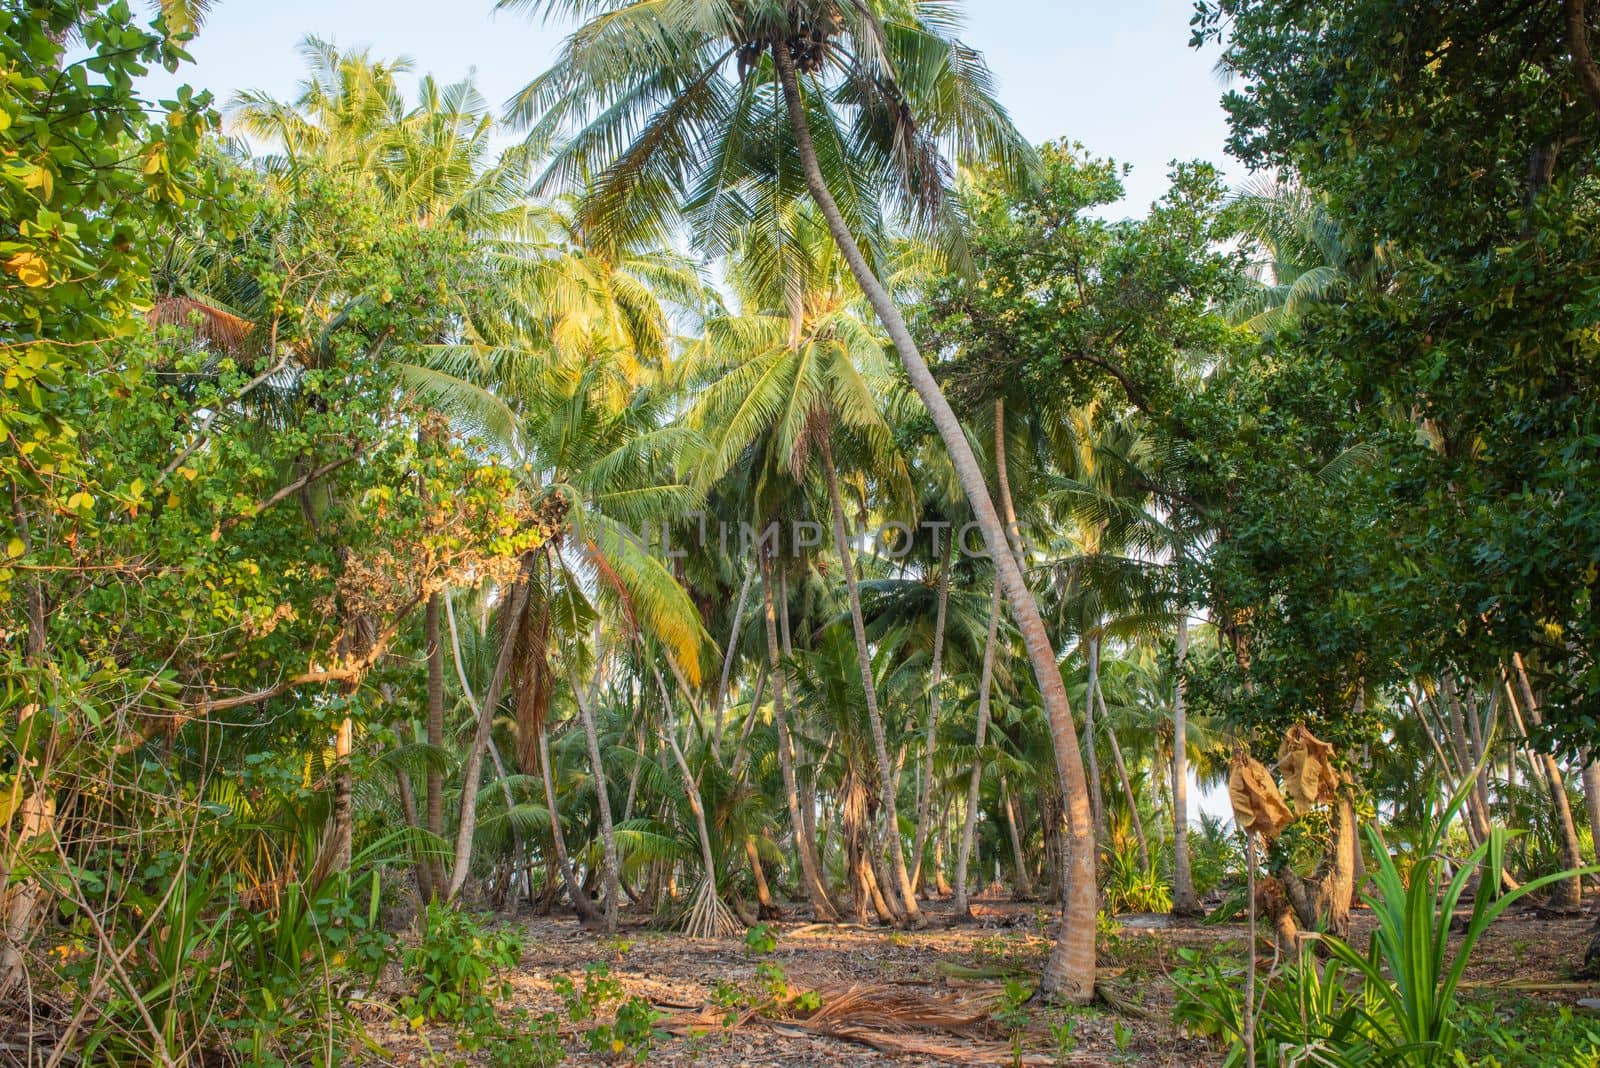 Remote tropical island paradise with thick forest vegetation of coconut palm trees cocos nucifera